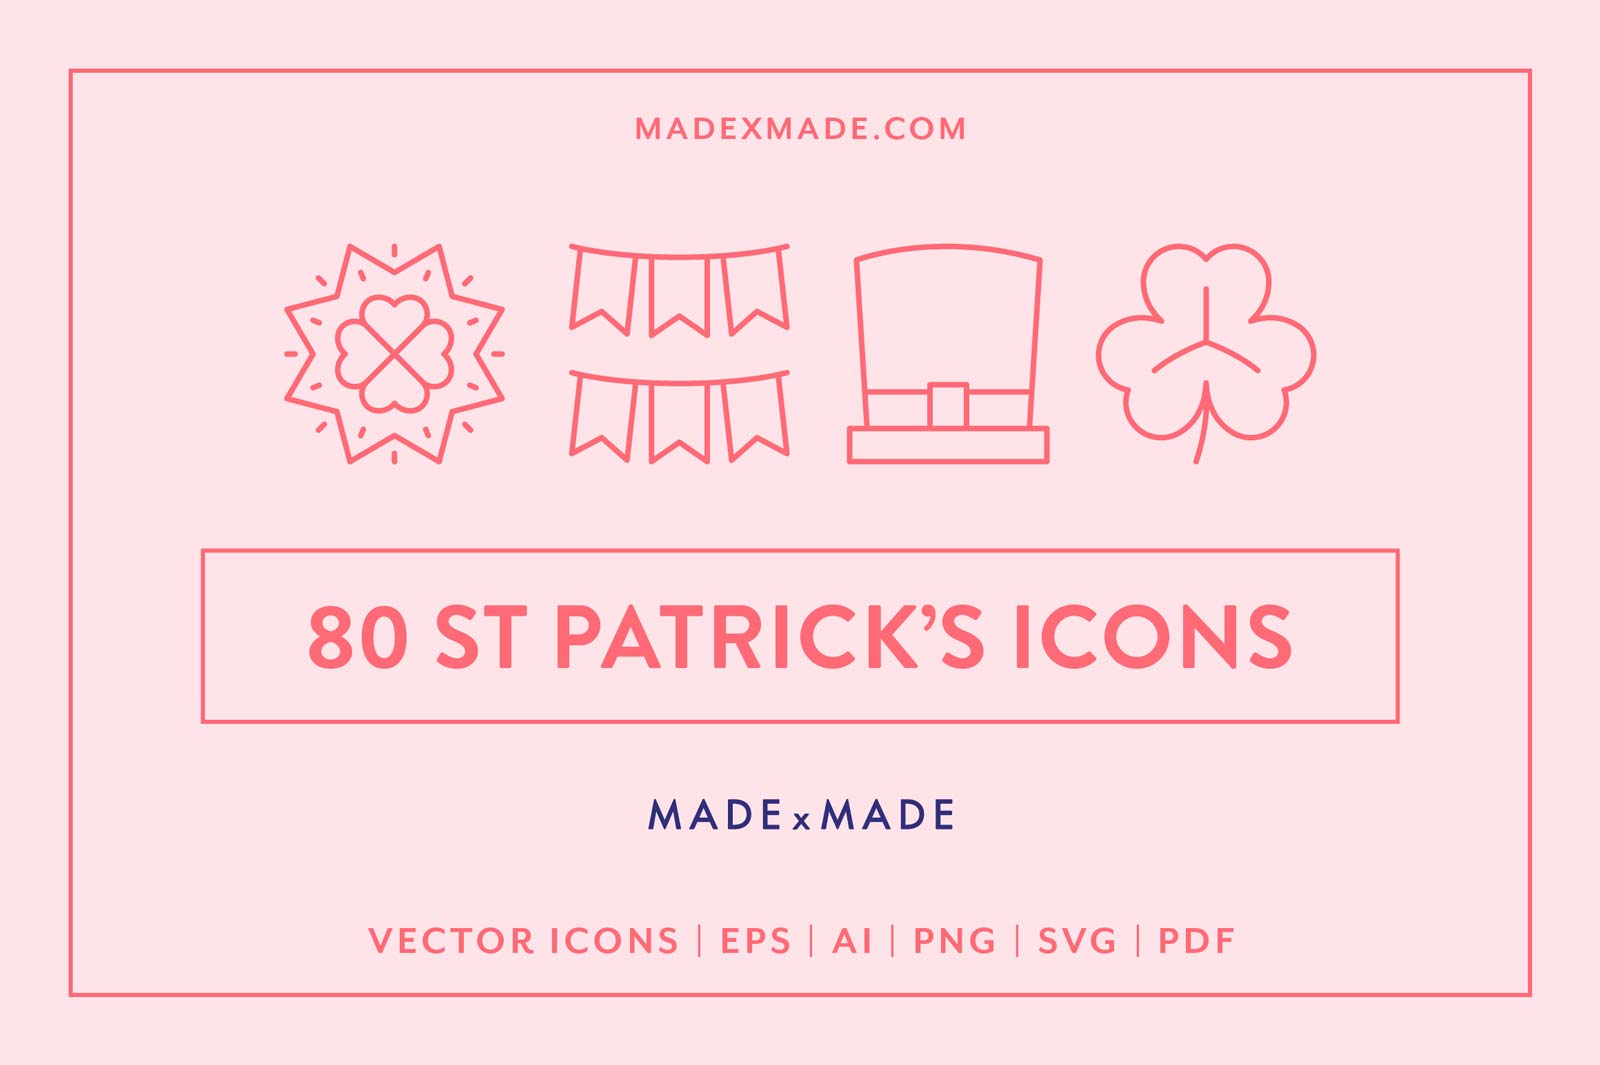 made x made icons st patricks day